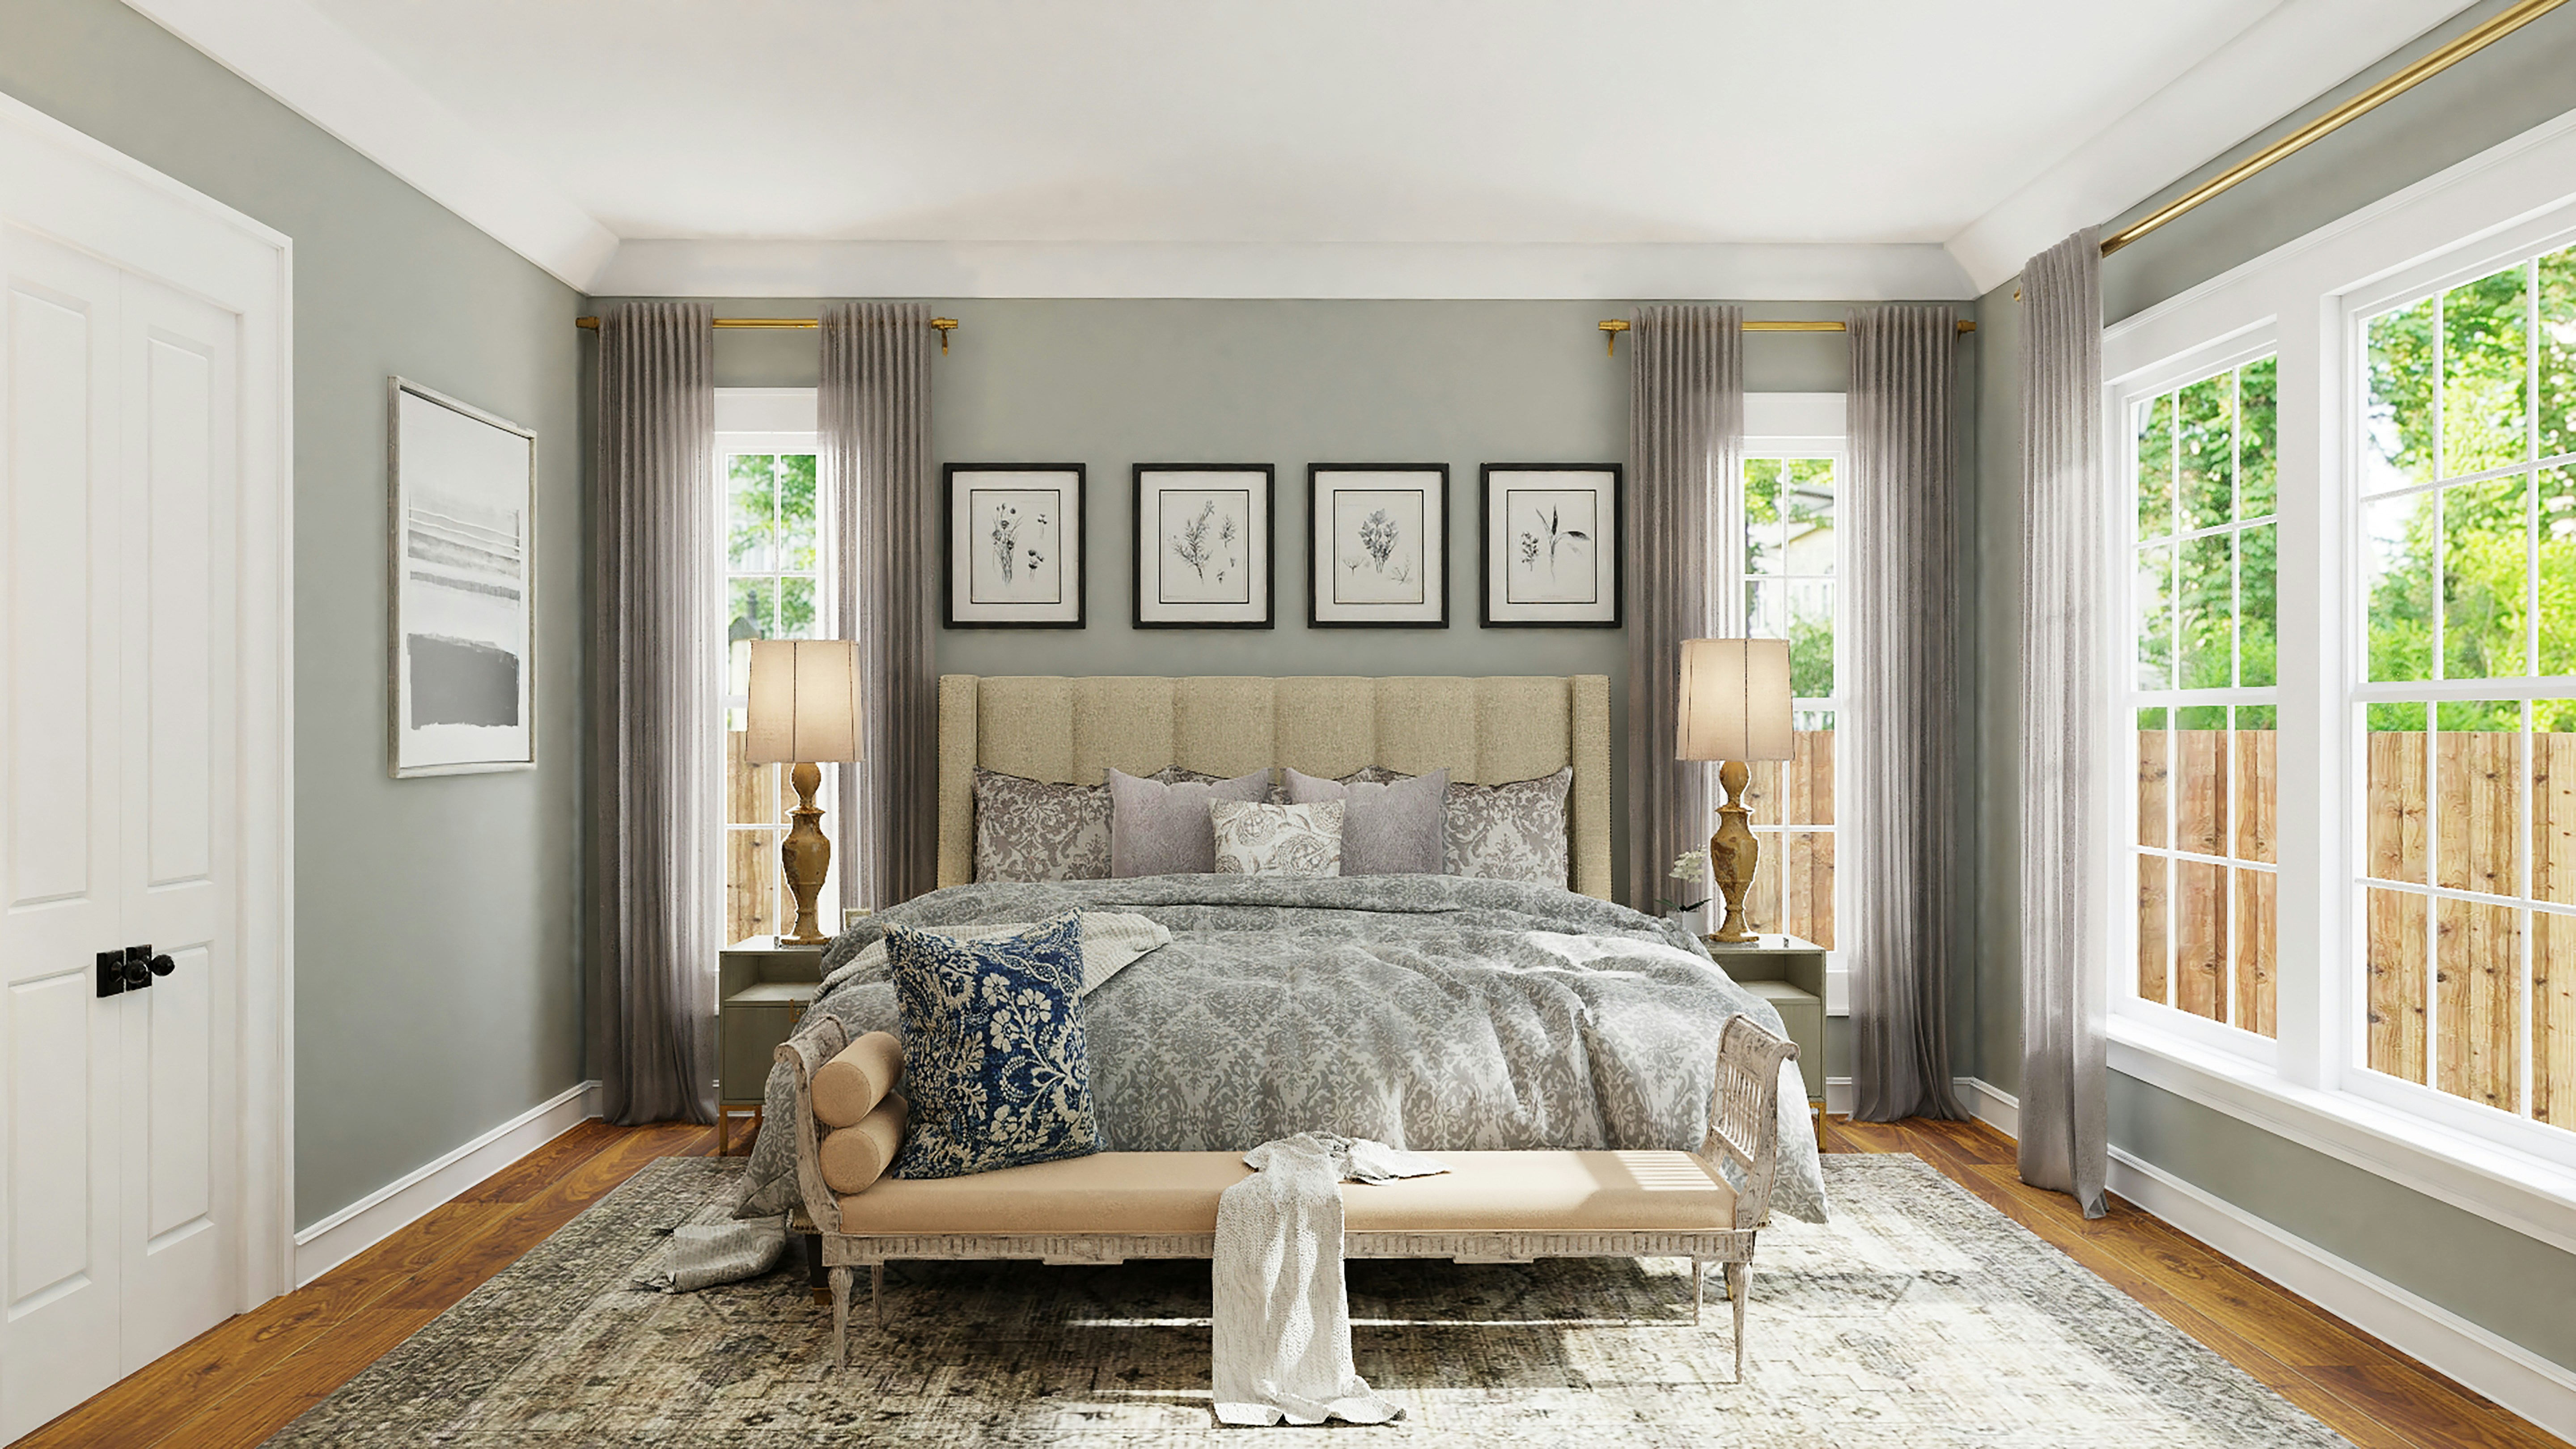 gray and white floral bed linen